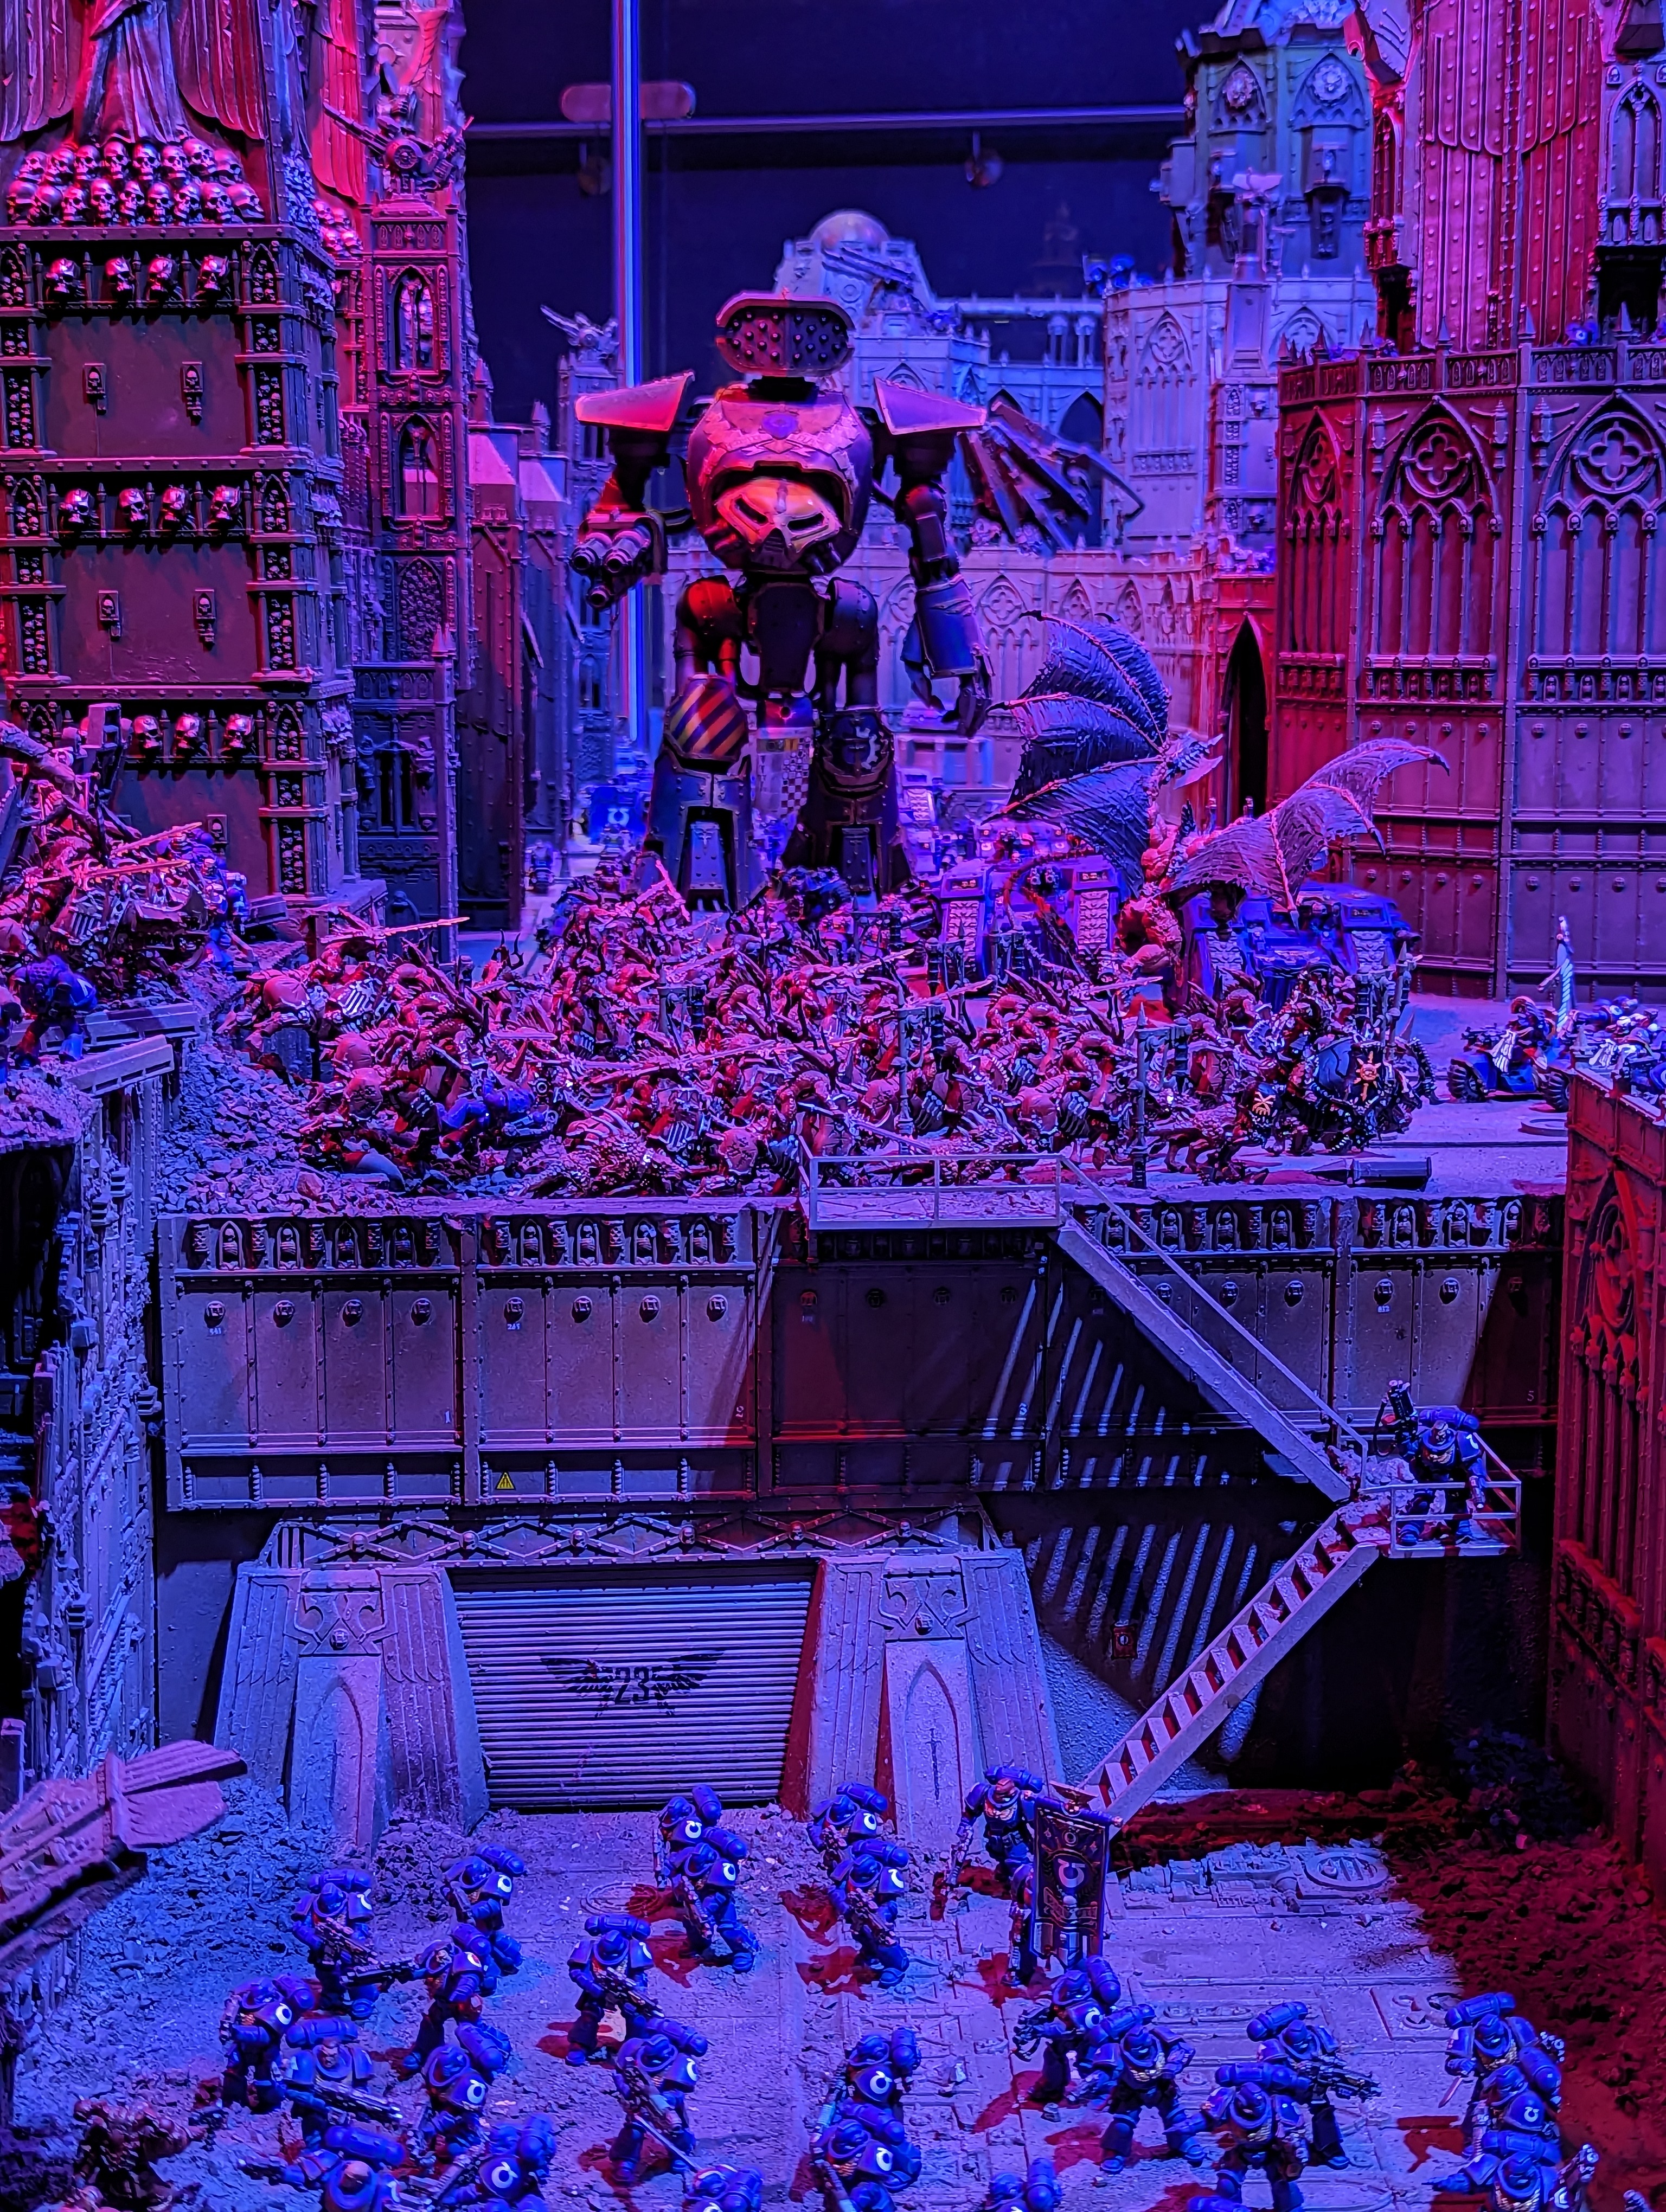 An image of the large centrepiece display at Warhammer World.